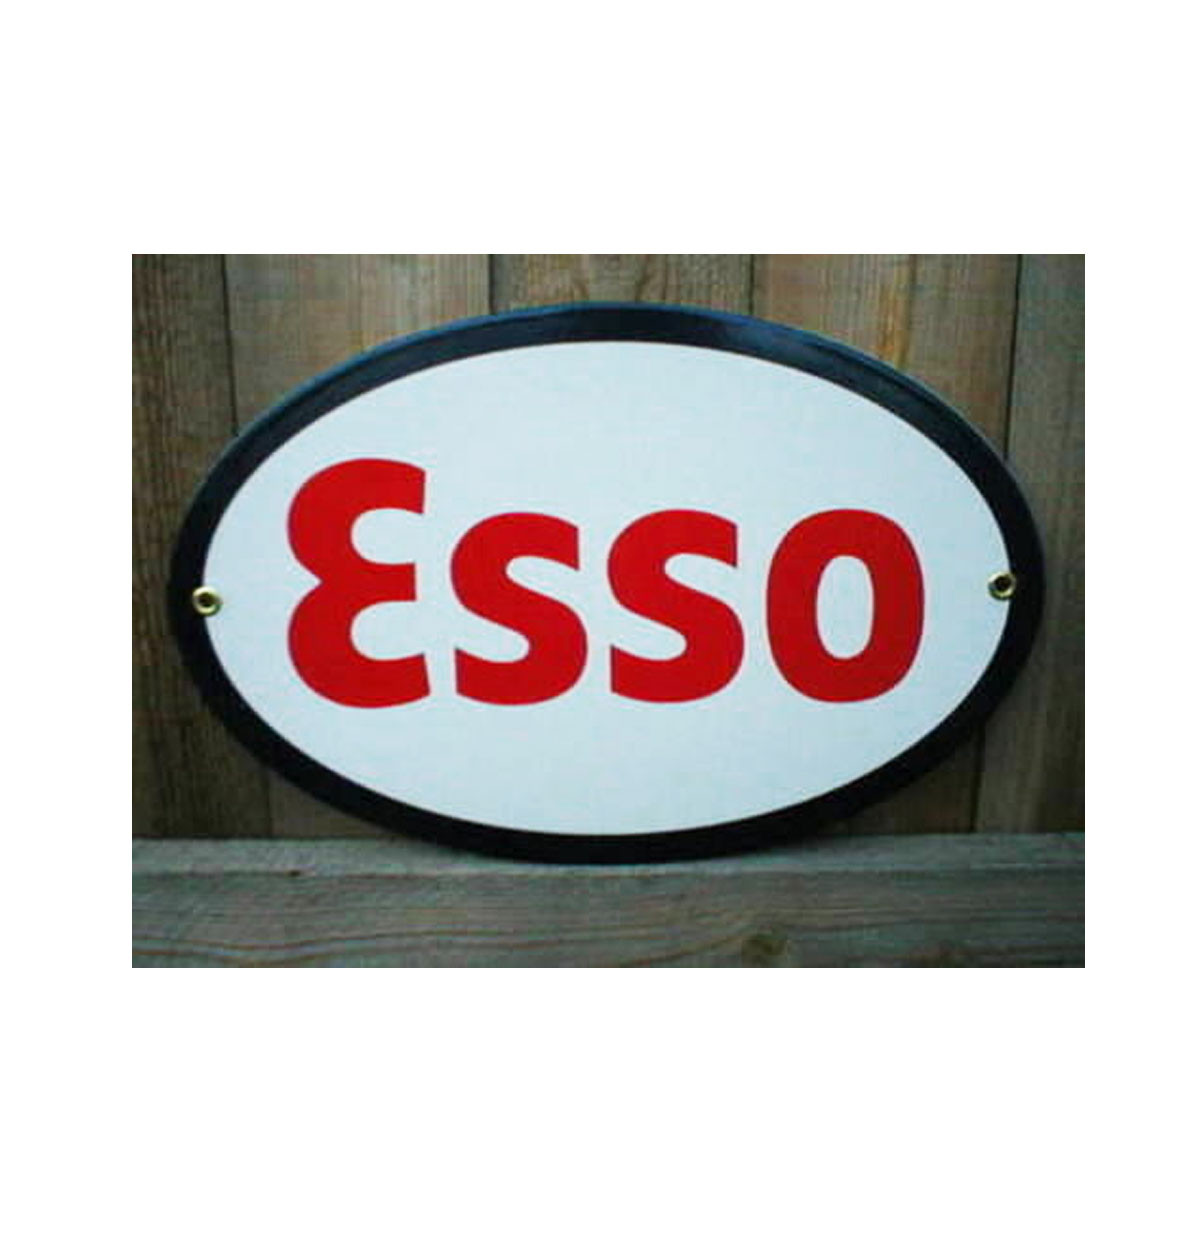 Esso Ovaal Emaille Bord 30 x 19 cm